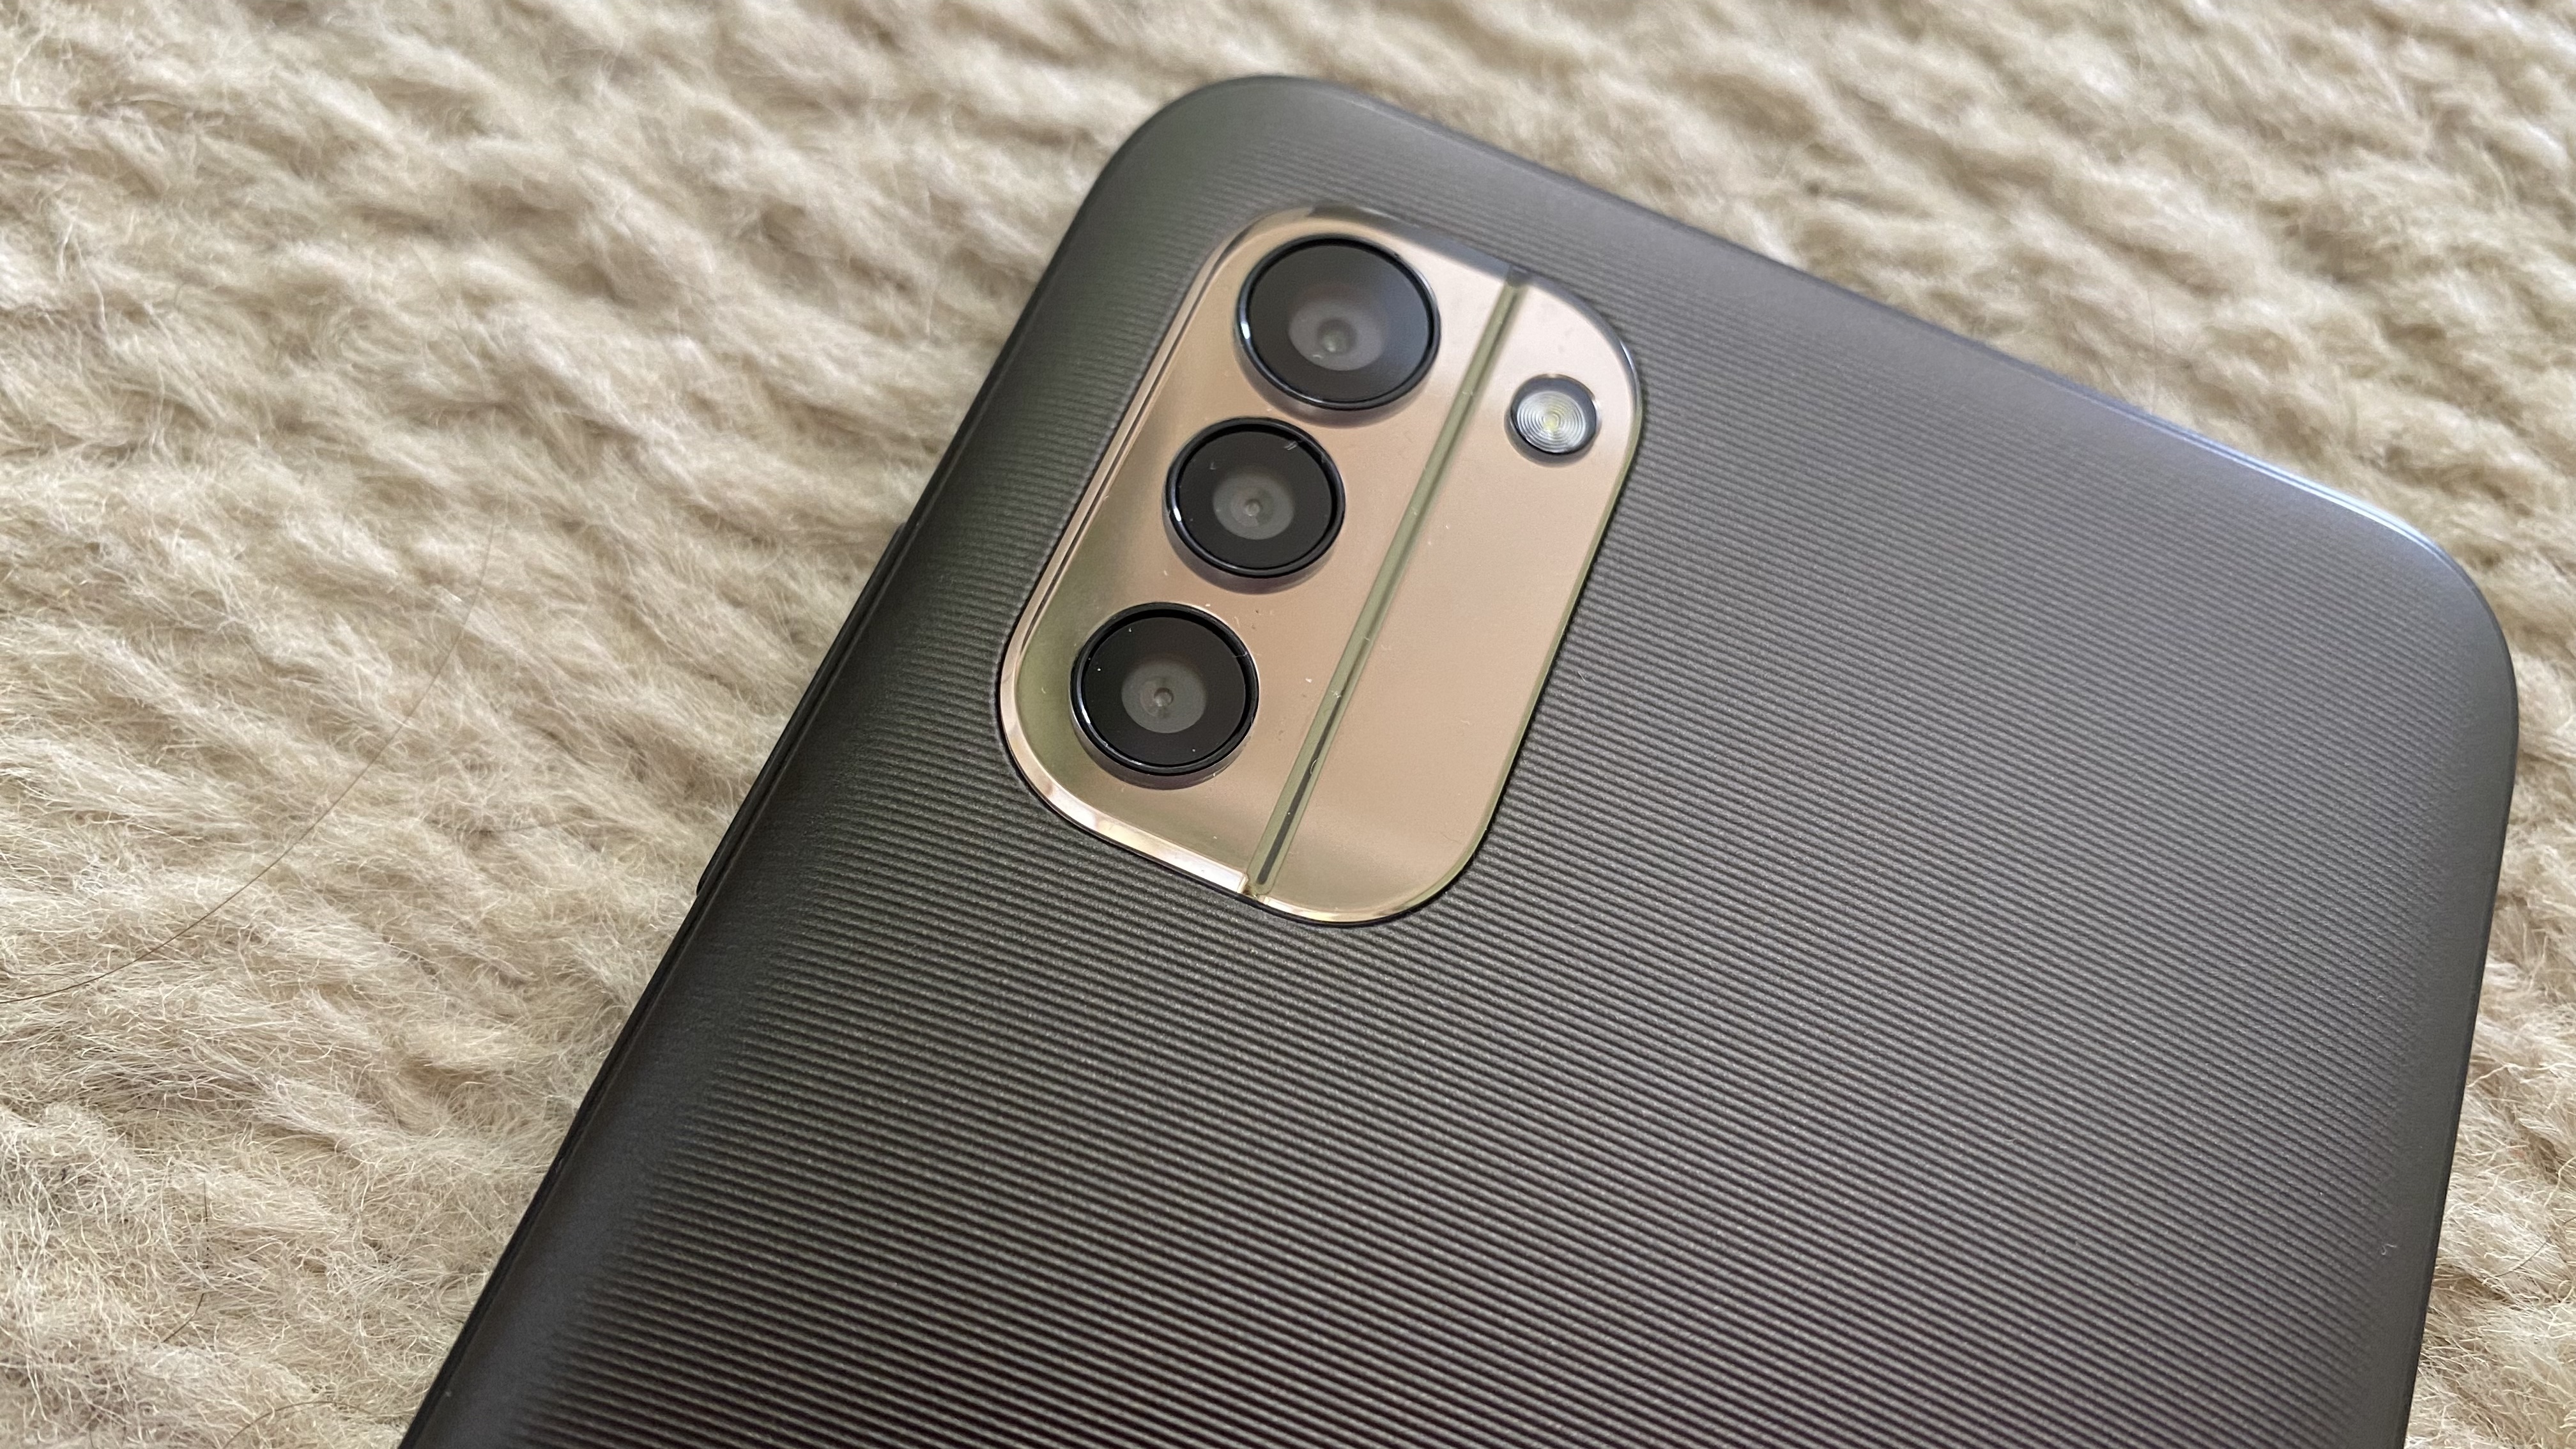 The camera block on a Nokia G11